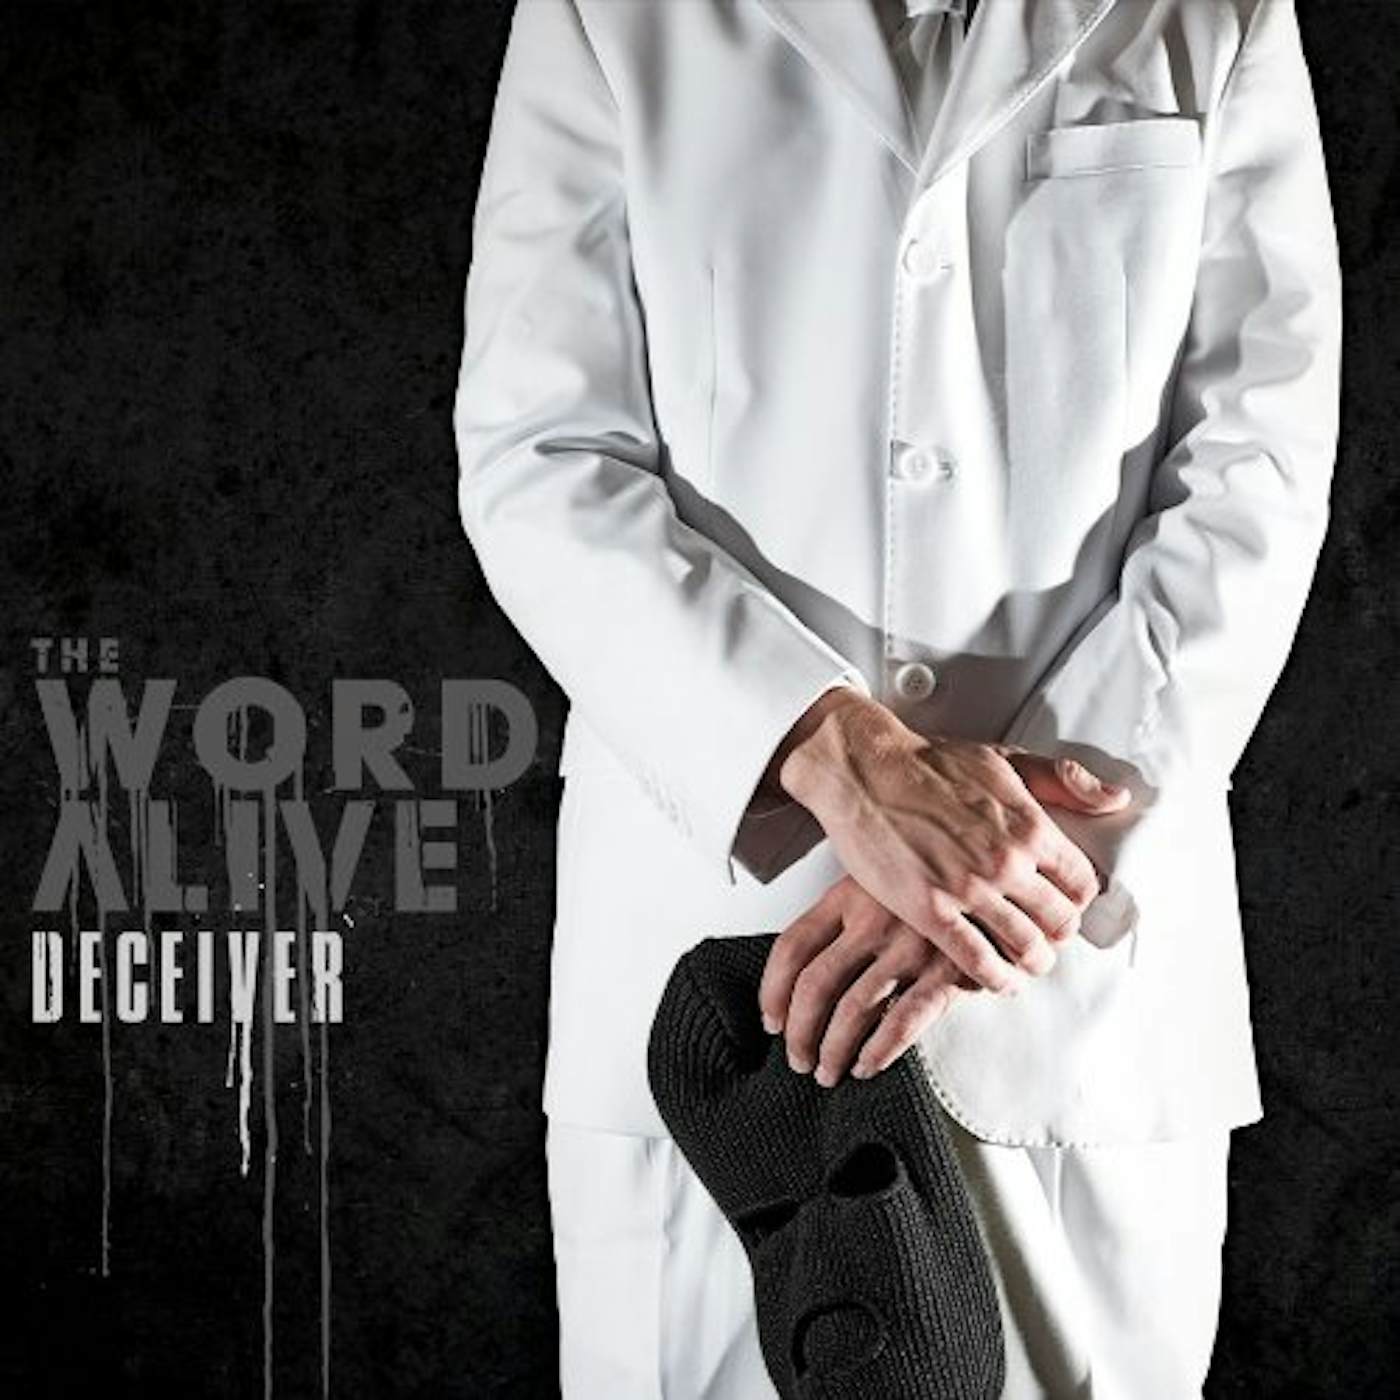 The Word Alive DECEIVER CD